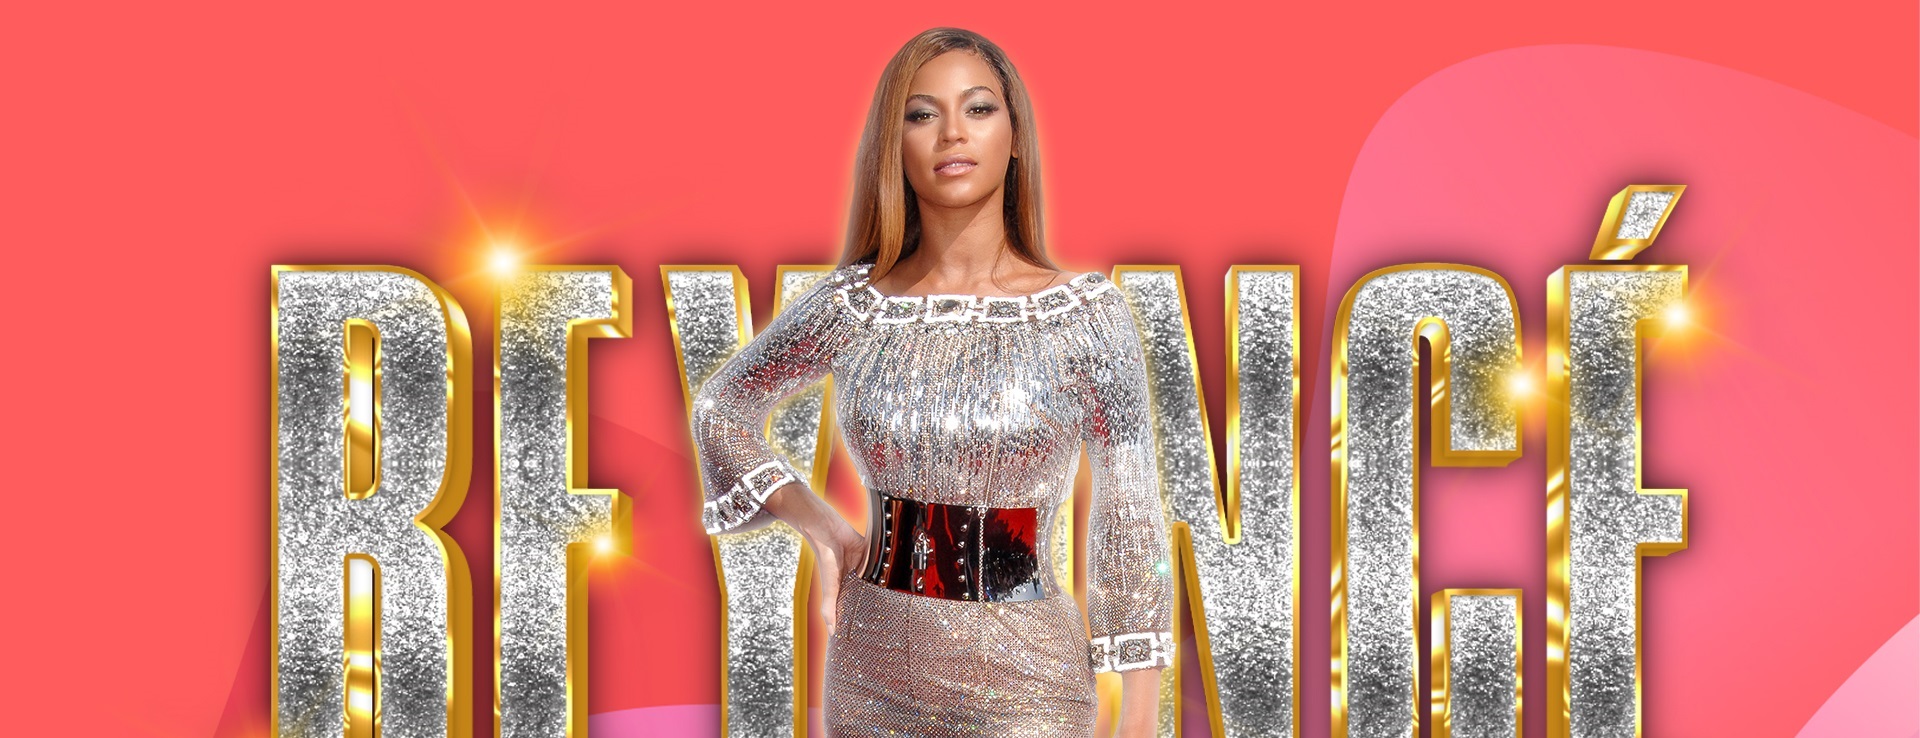 Beyoncé stands in front of her name in silver glitter, set against a pink background.